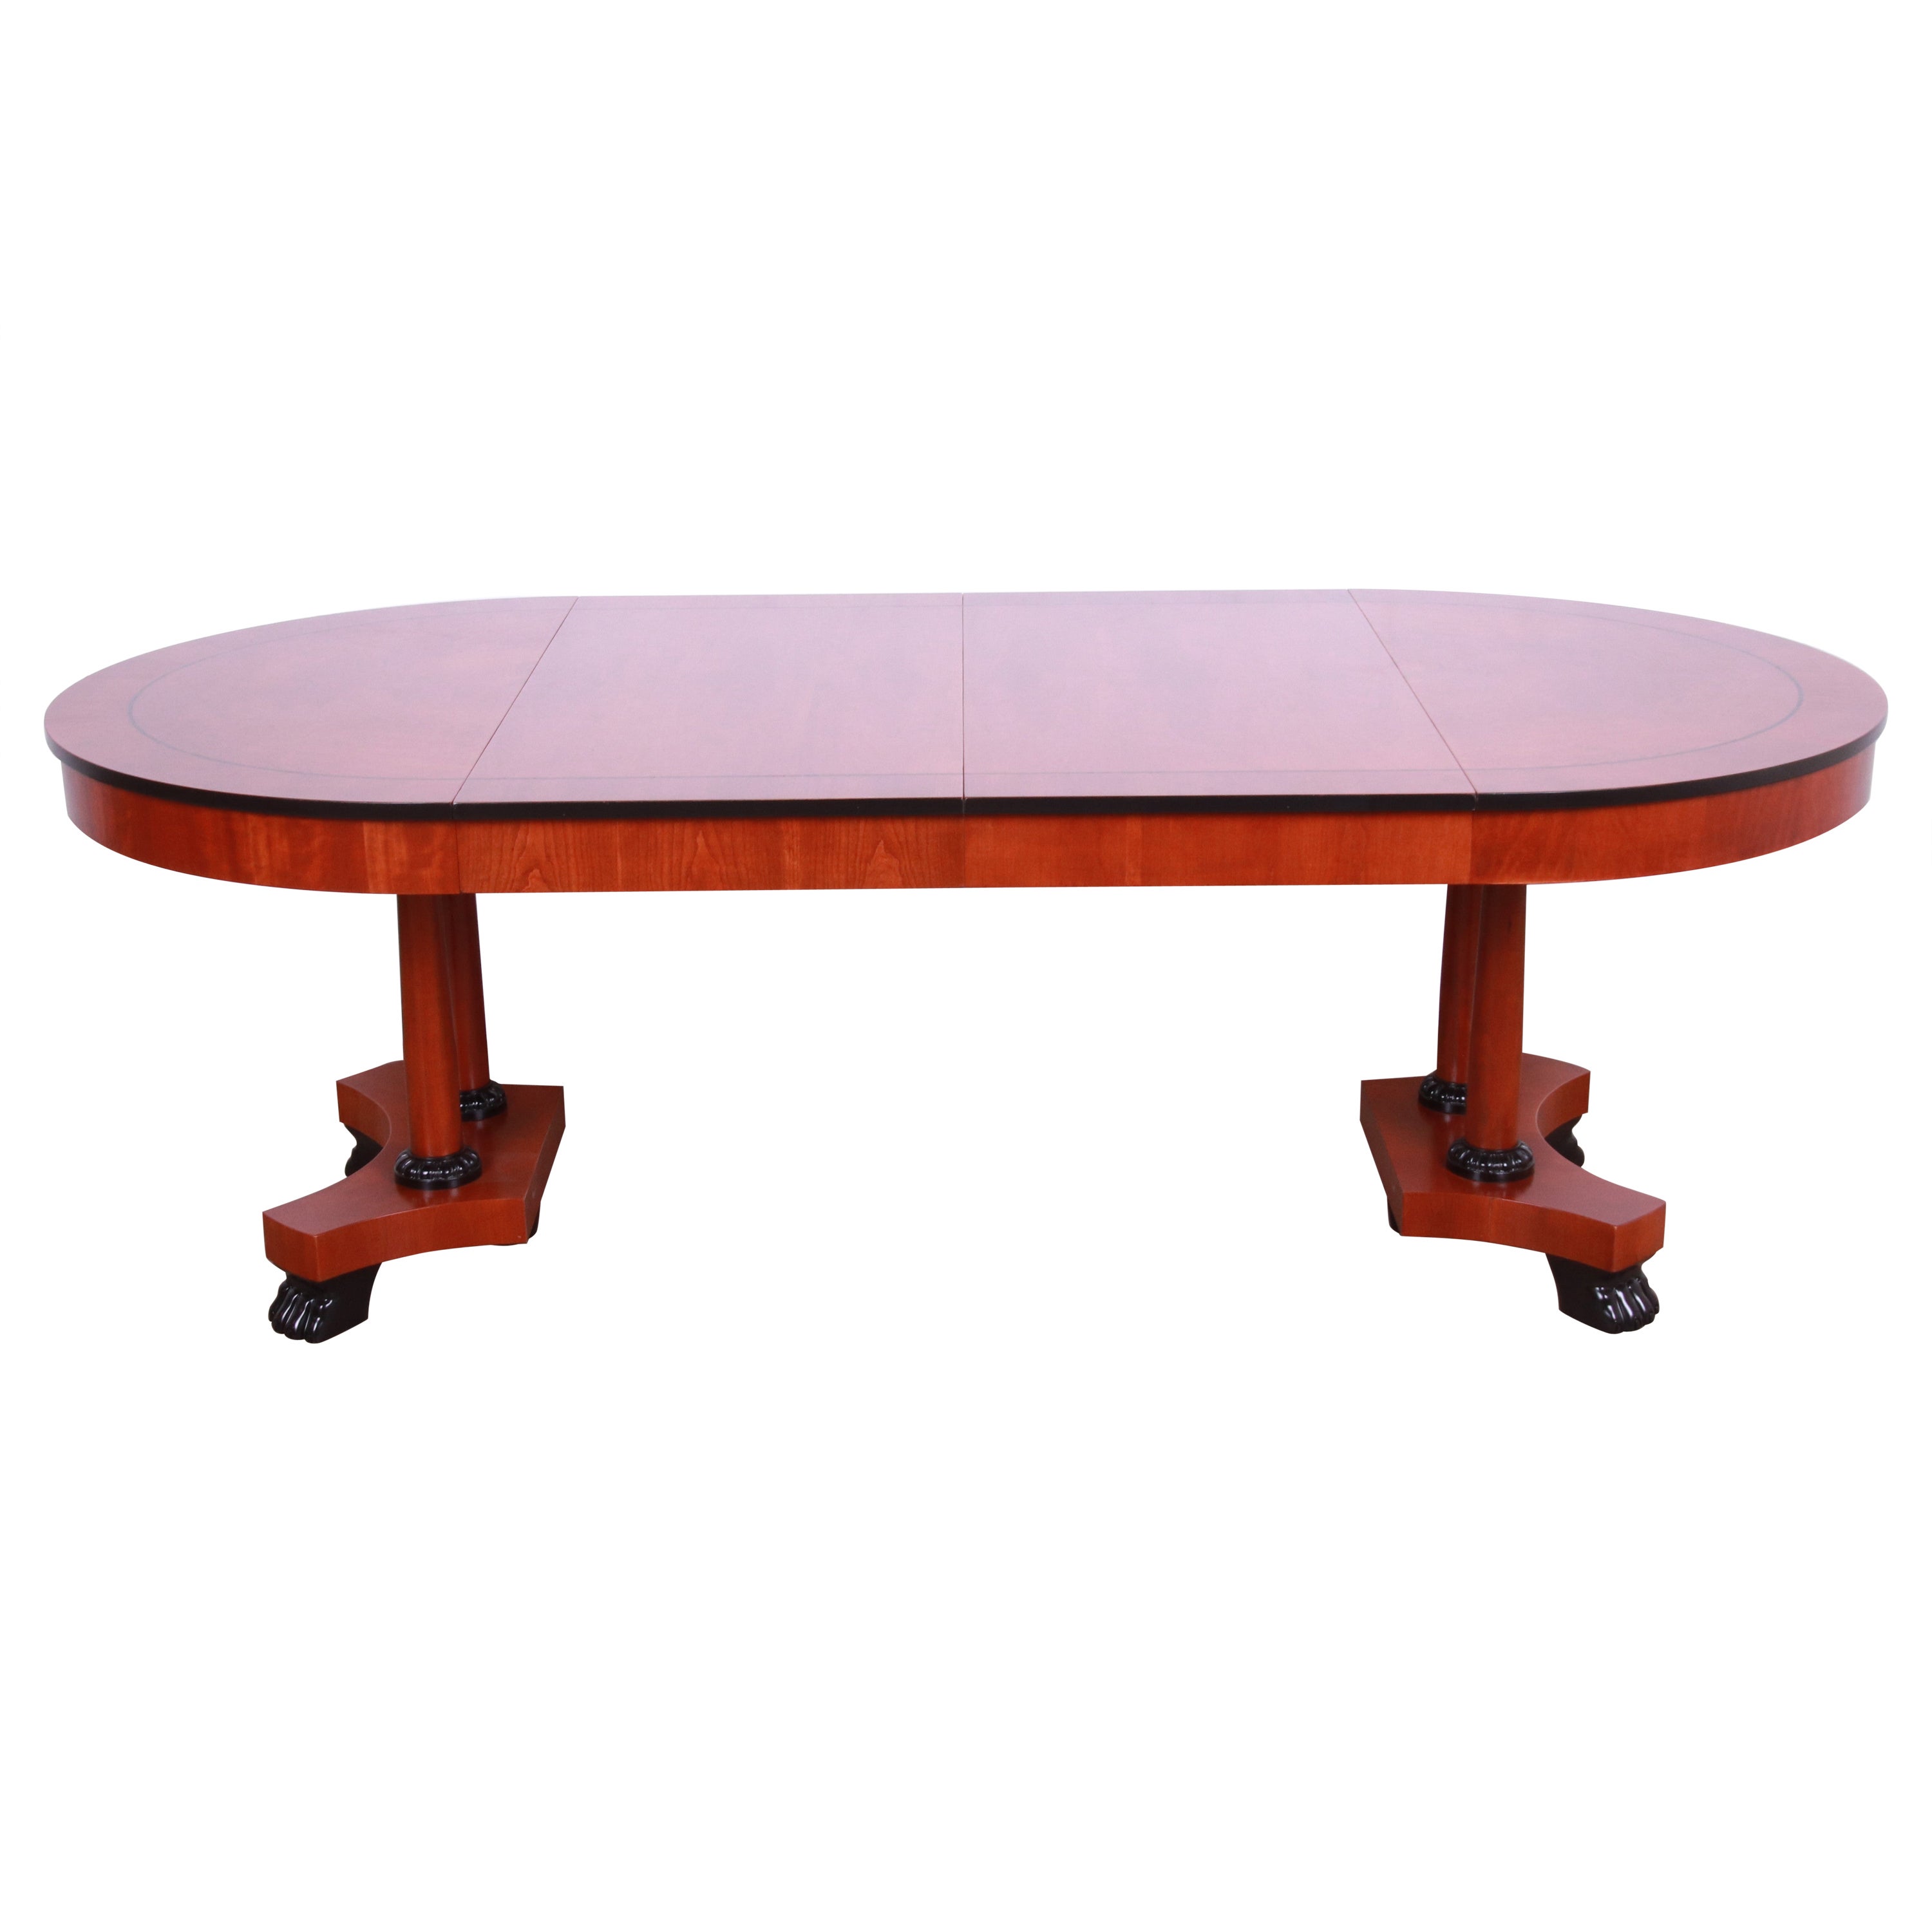 Baker Furniture Neoclassical Cherry Wood Extension Dining Table, Refinished